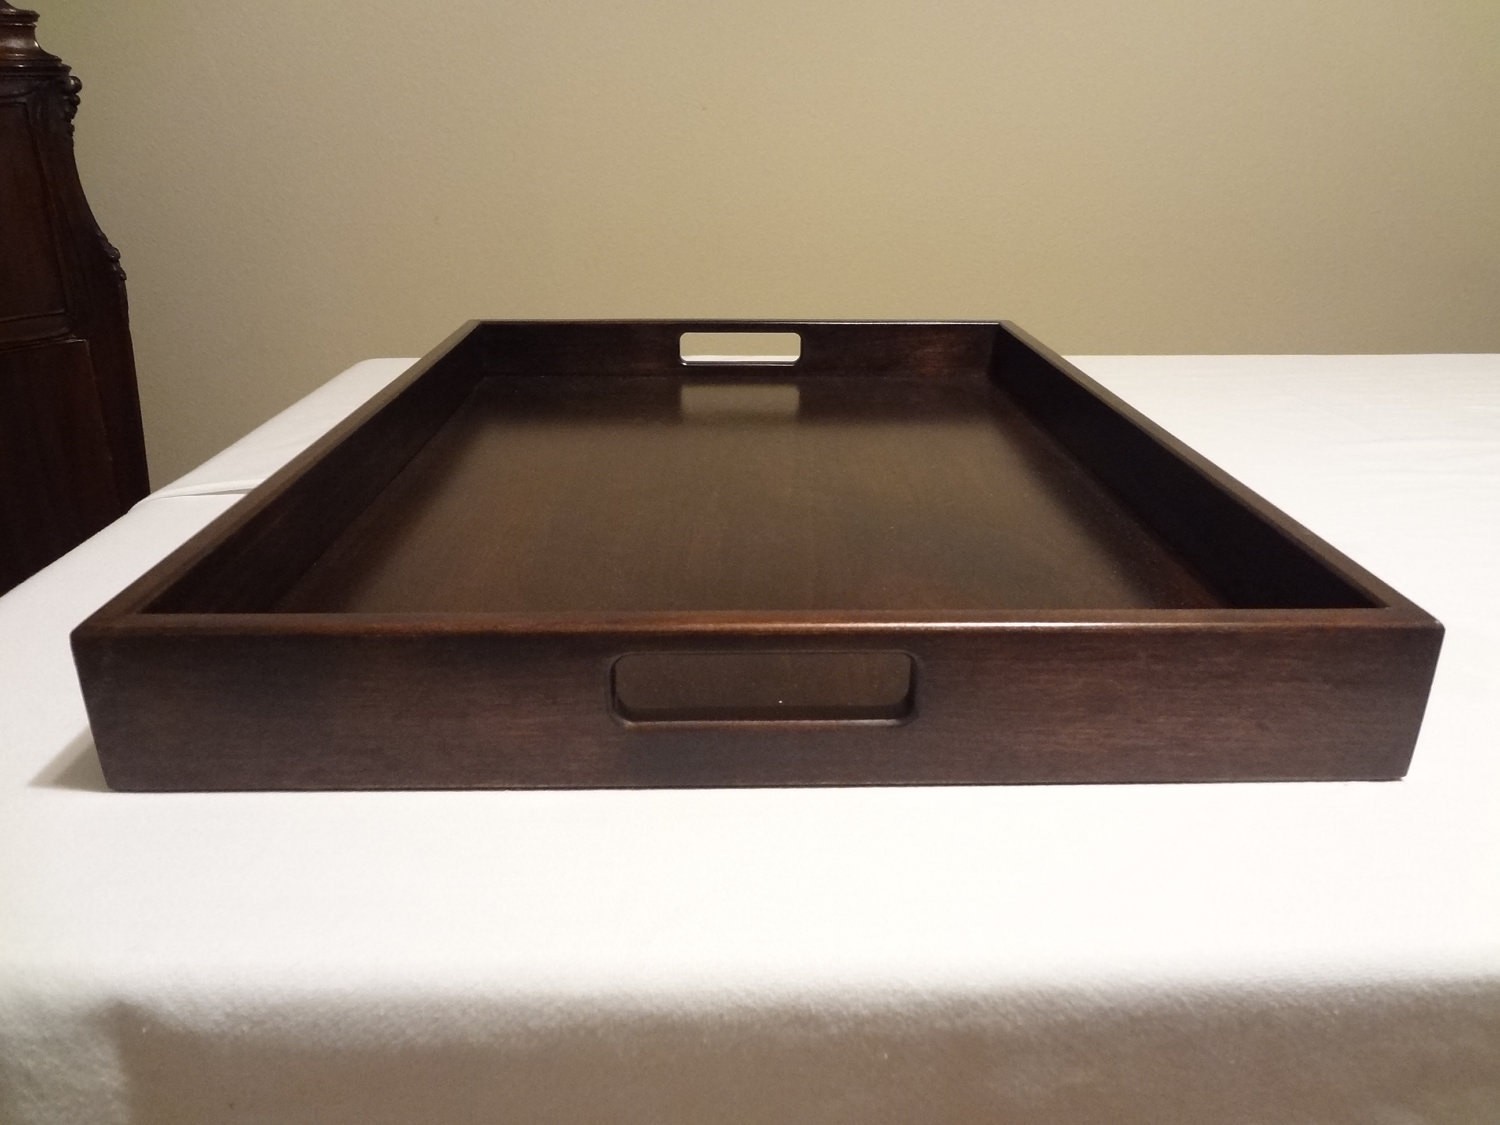 Custom made ottoman or serving tray 18 x 24